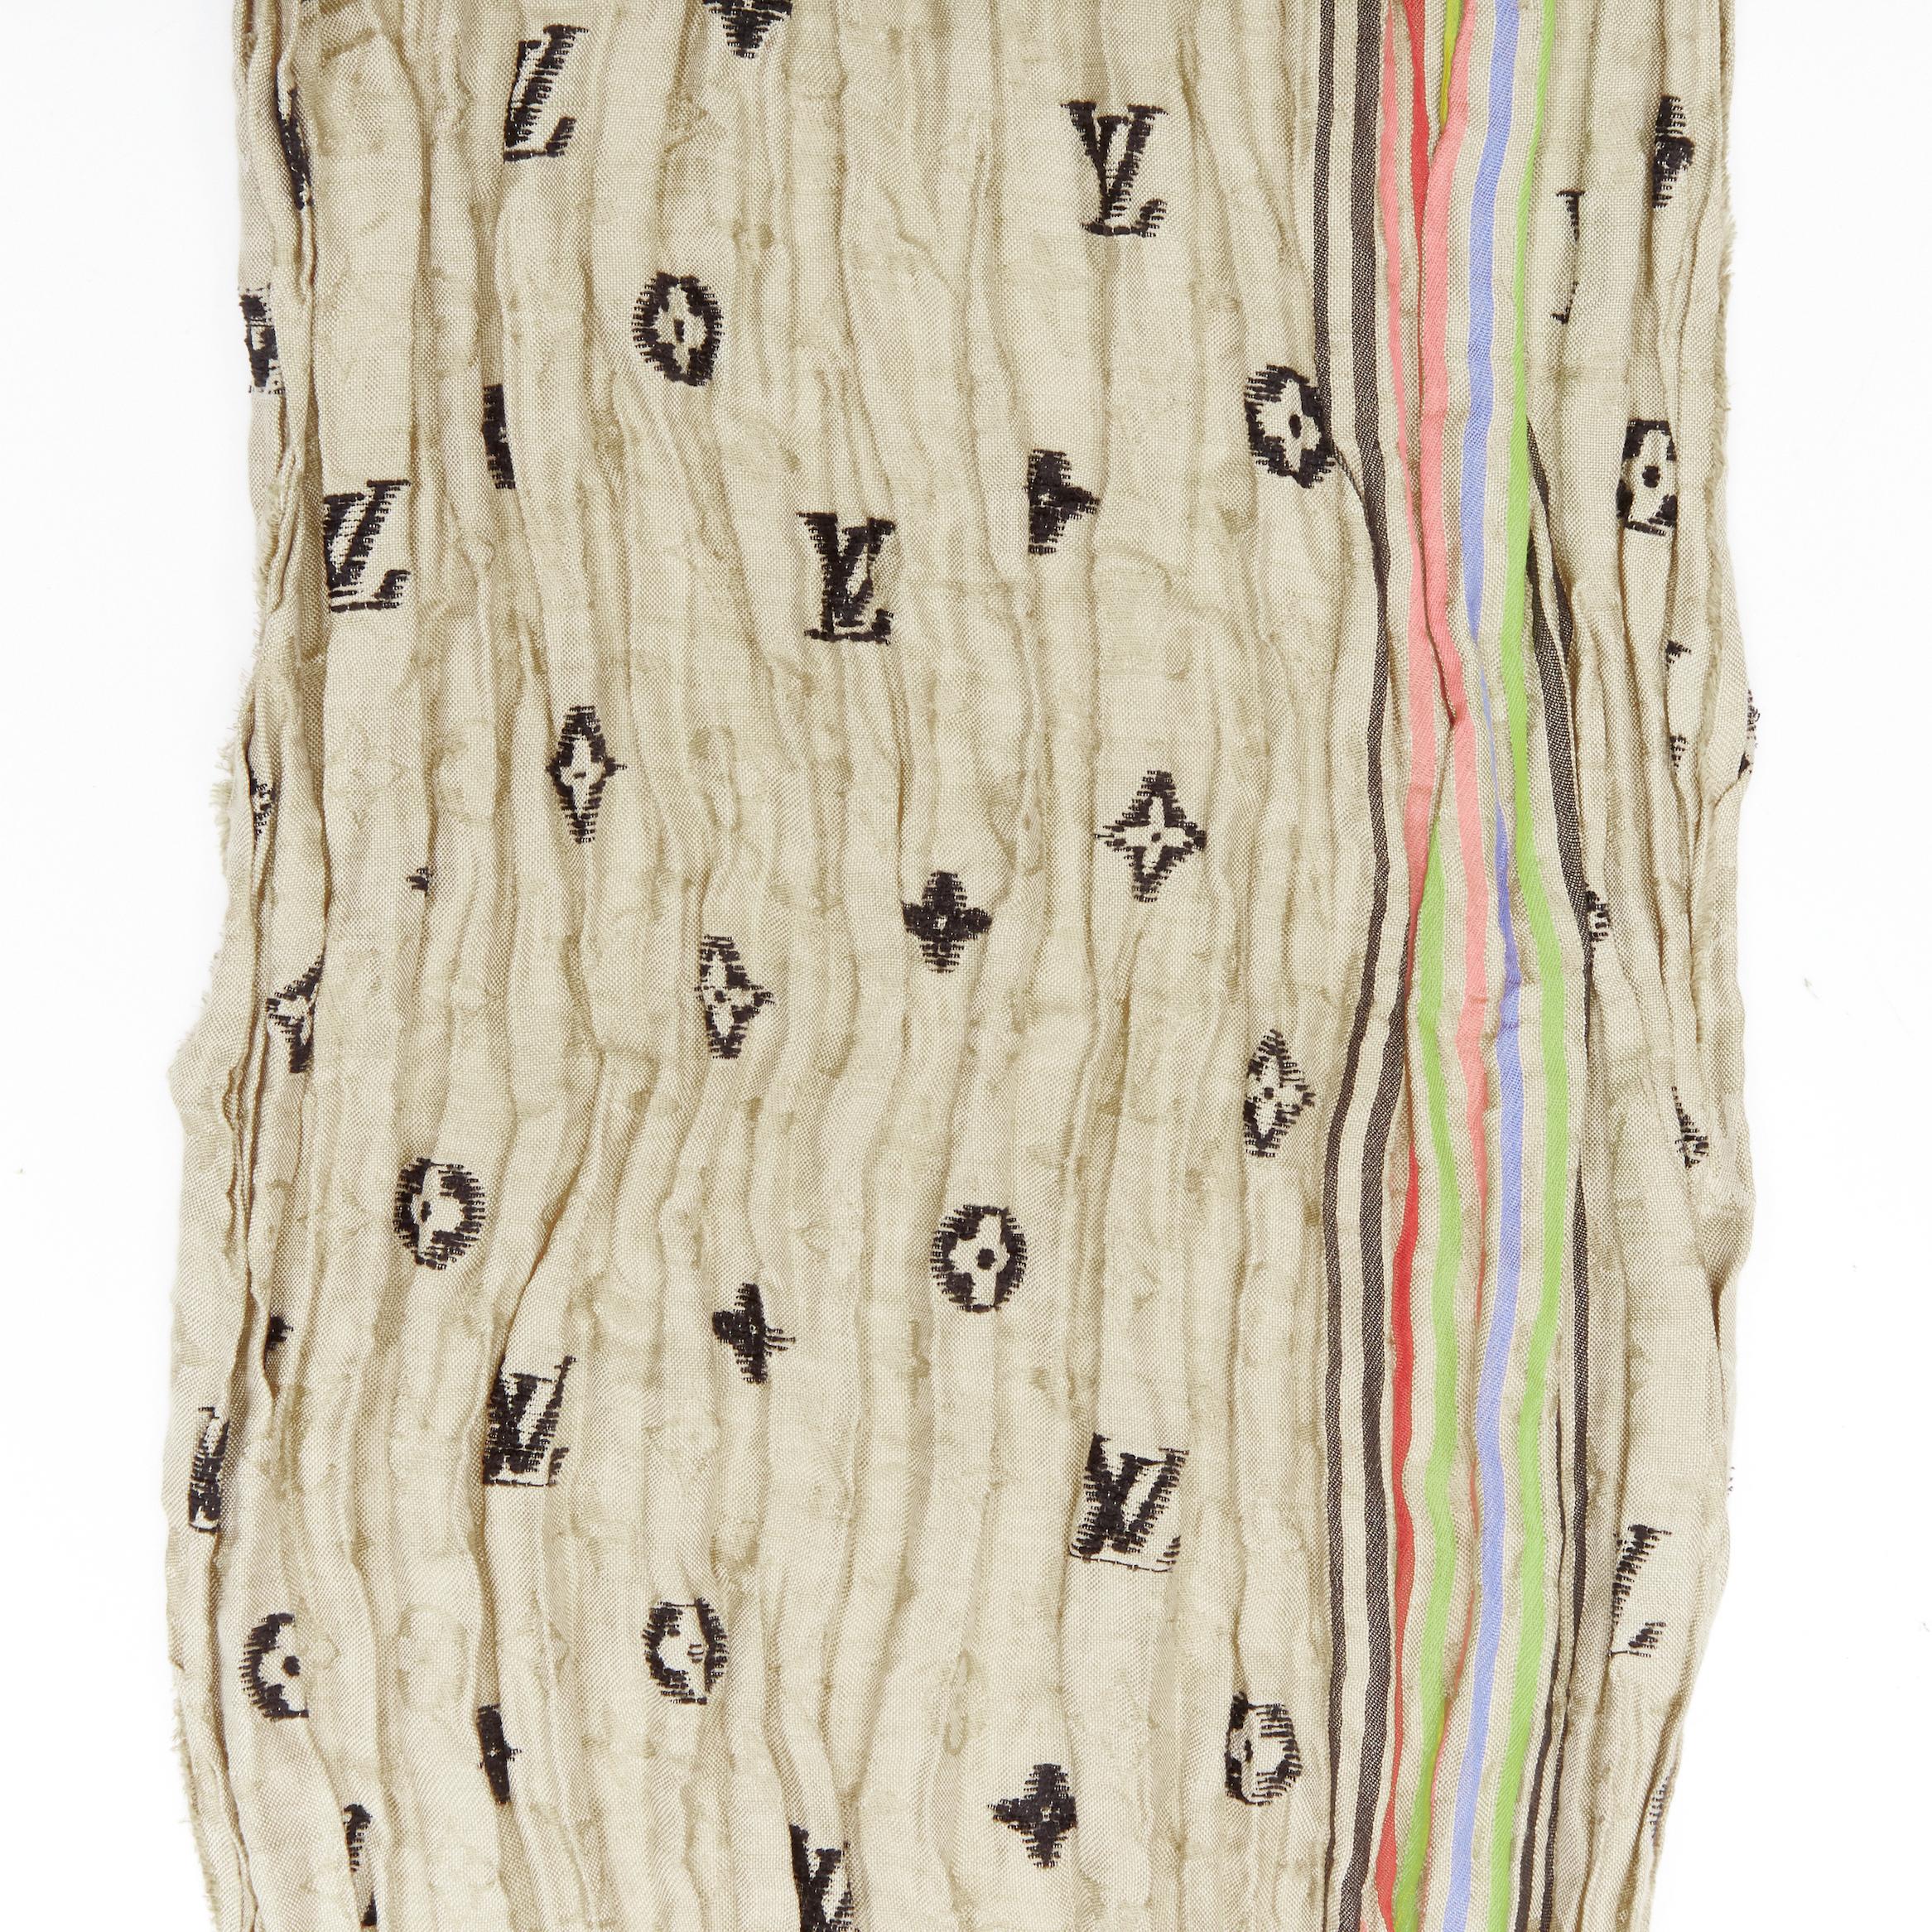 LOUIS VUITTON 2009 Cheche Bohemian silk linen rainbow striped monogram scarf 
Reference: ANWU/A00585 
Brand: Louis Vuitton 
Collection: Cheche Bohemian 
Material: Silk 
Color: Brown 
Pattern: Checked 
Extra Detail: LV monogram jacquard. Rainbow